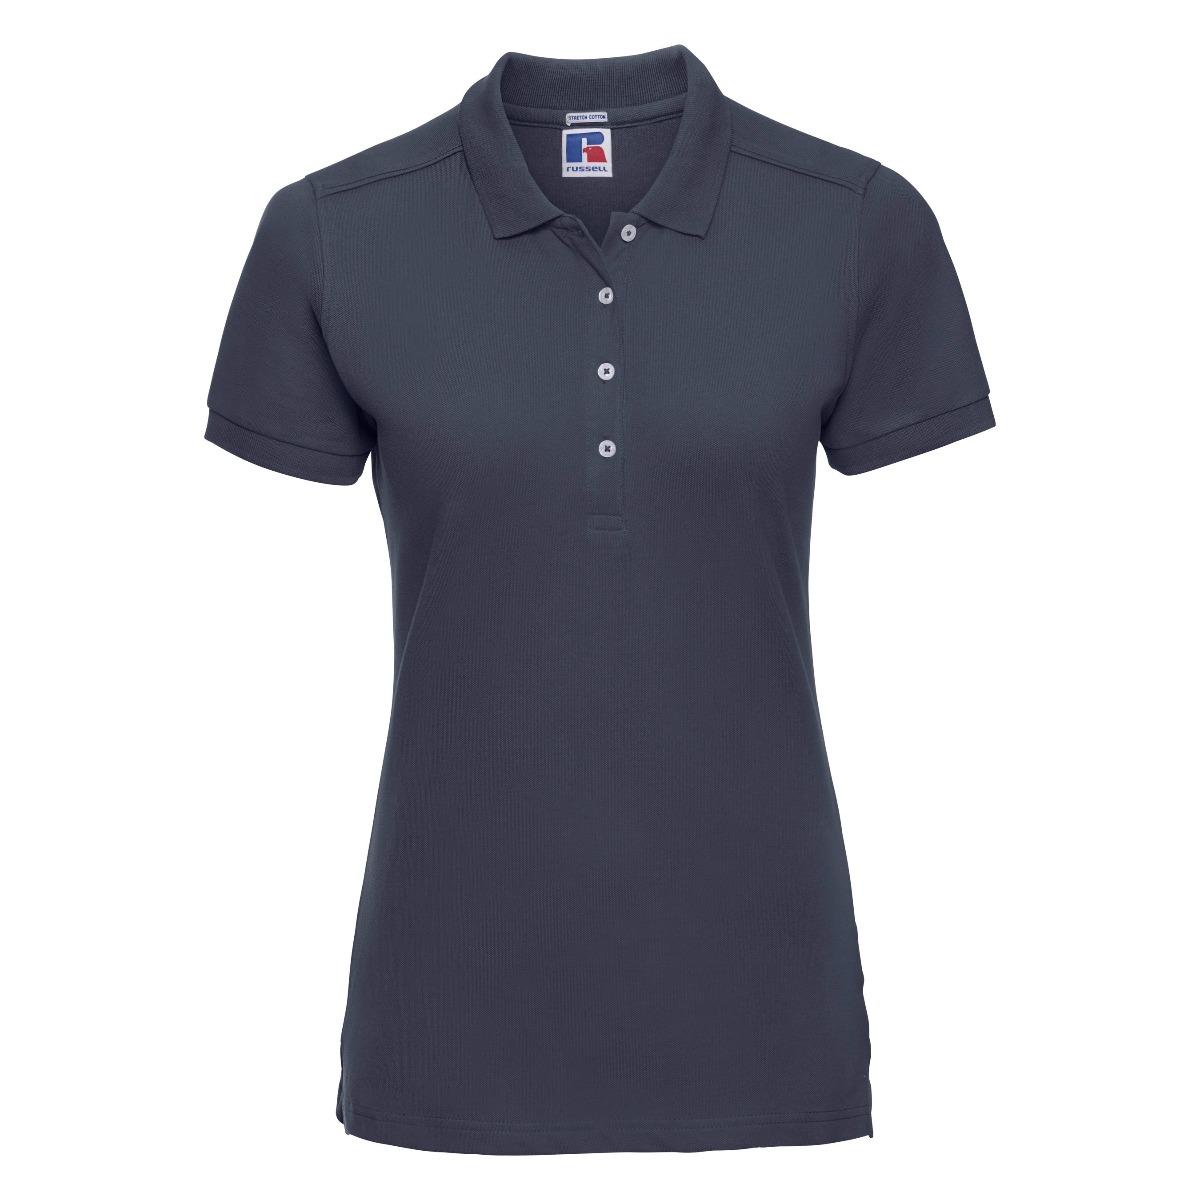 ax-httpswebsystems.s3.amazonaws.comtmp_for_downloadrussell-womens-stretch-french-navy_1_1.jpg